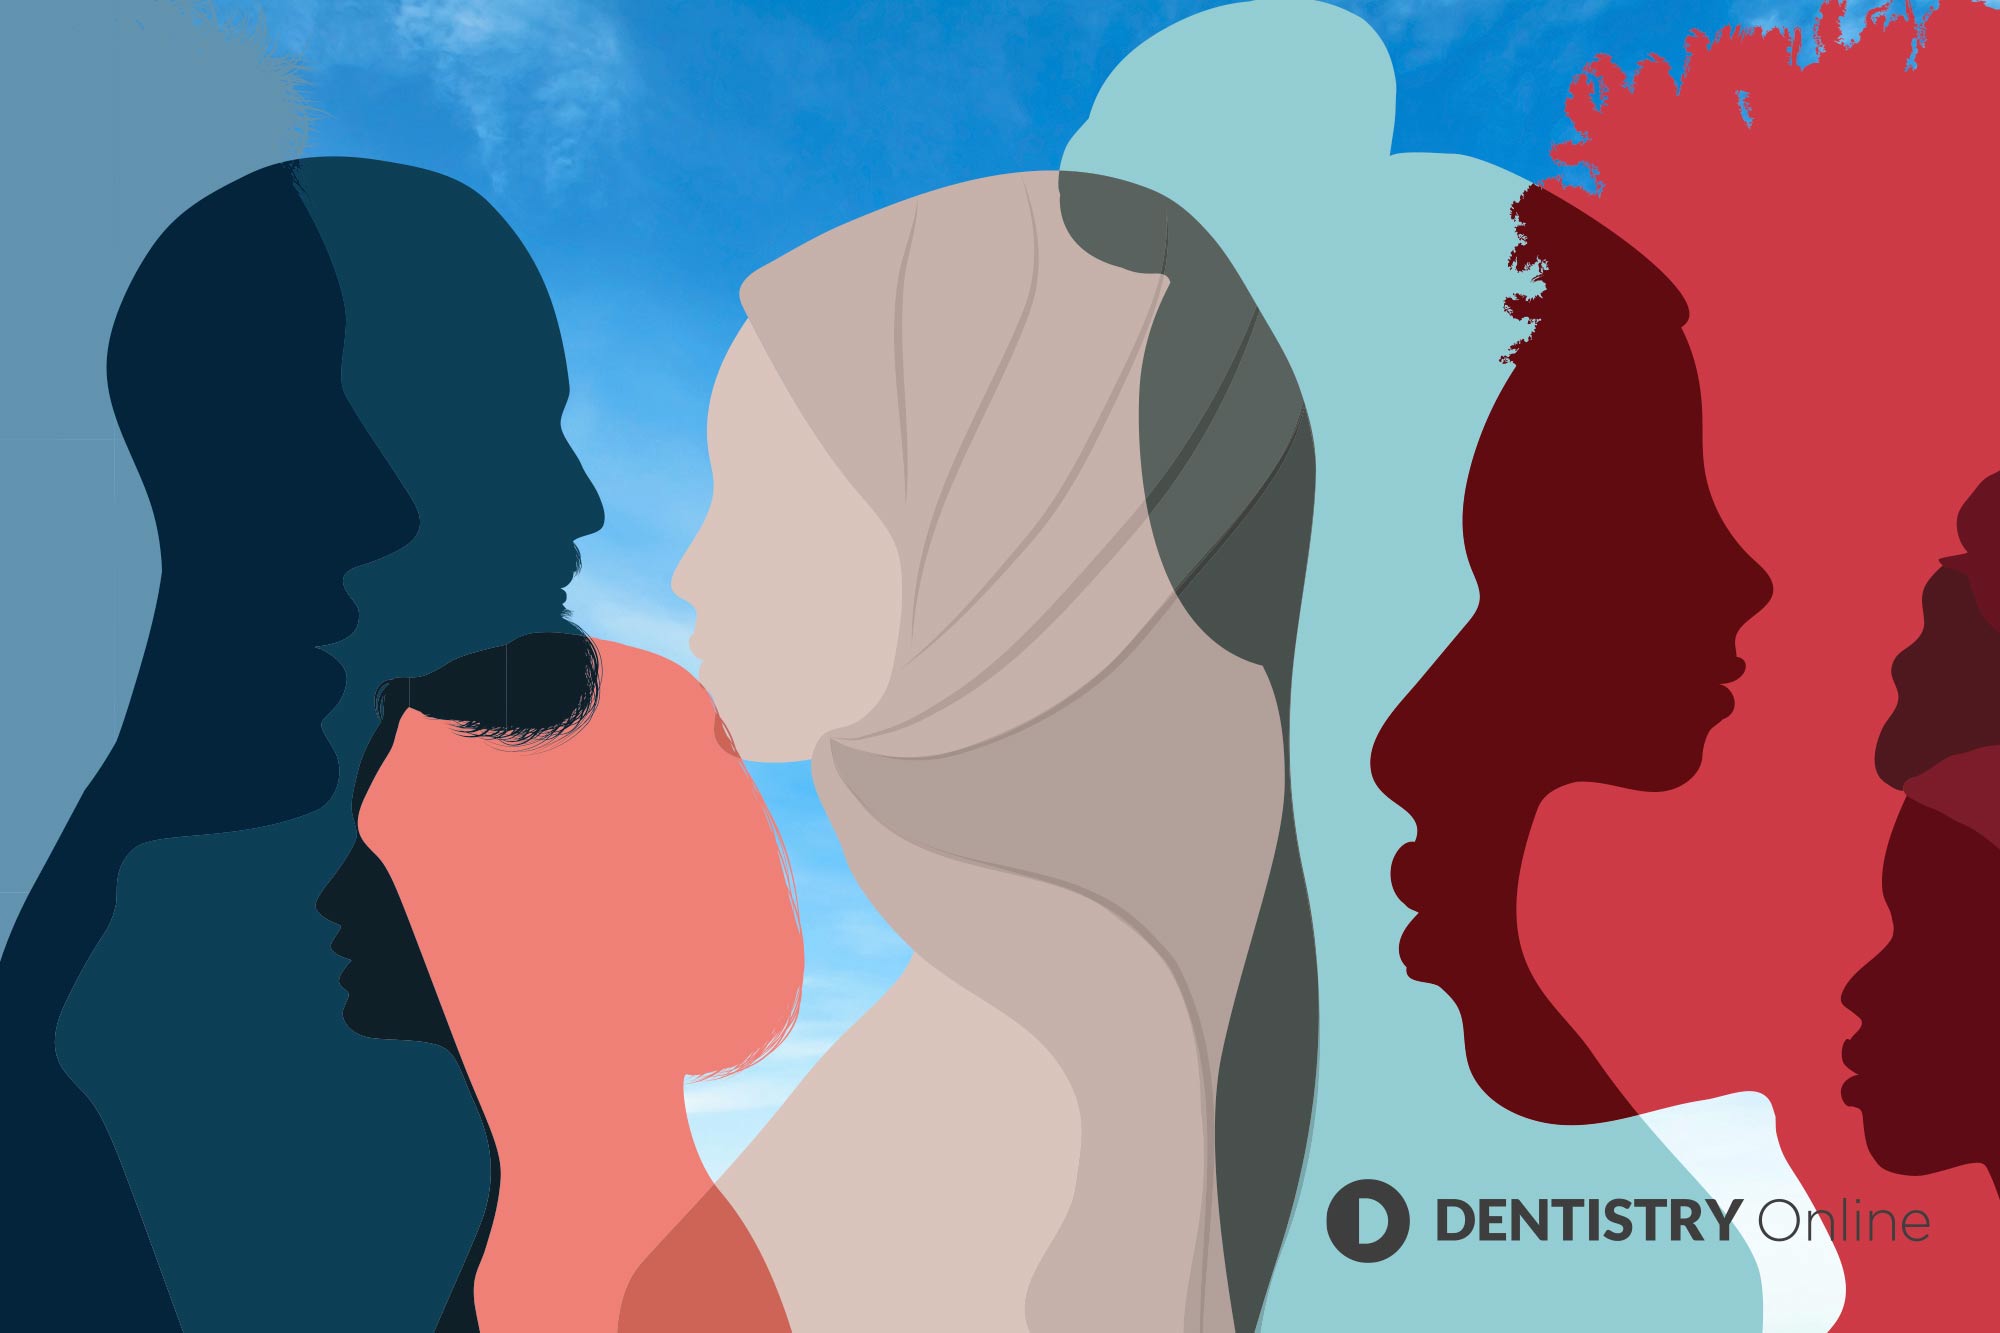 In response to the growing awareness around issues of discrimination and diversity, the OCDO created the Diversity in Dentistry Action Group (DDAG)